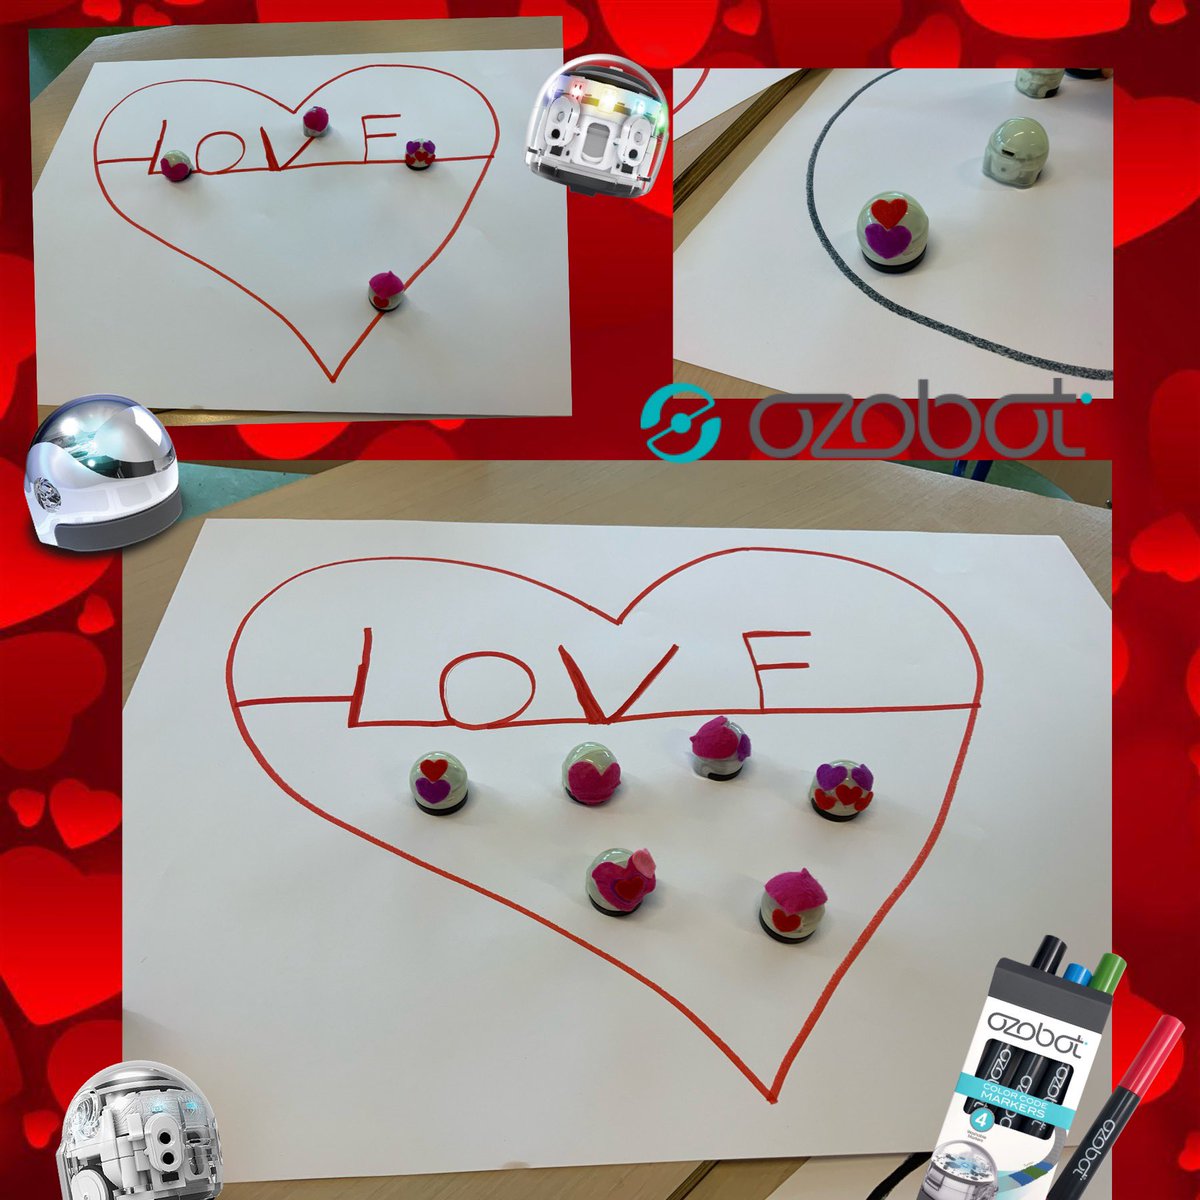 We have decorated the #ozobots with love hearts for Valentines Day

#coding #ValentinesDay #edtech #dutwitter @Ozobot #education